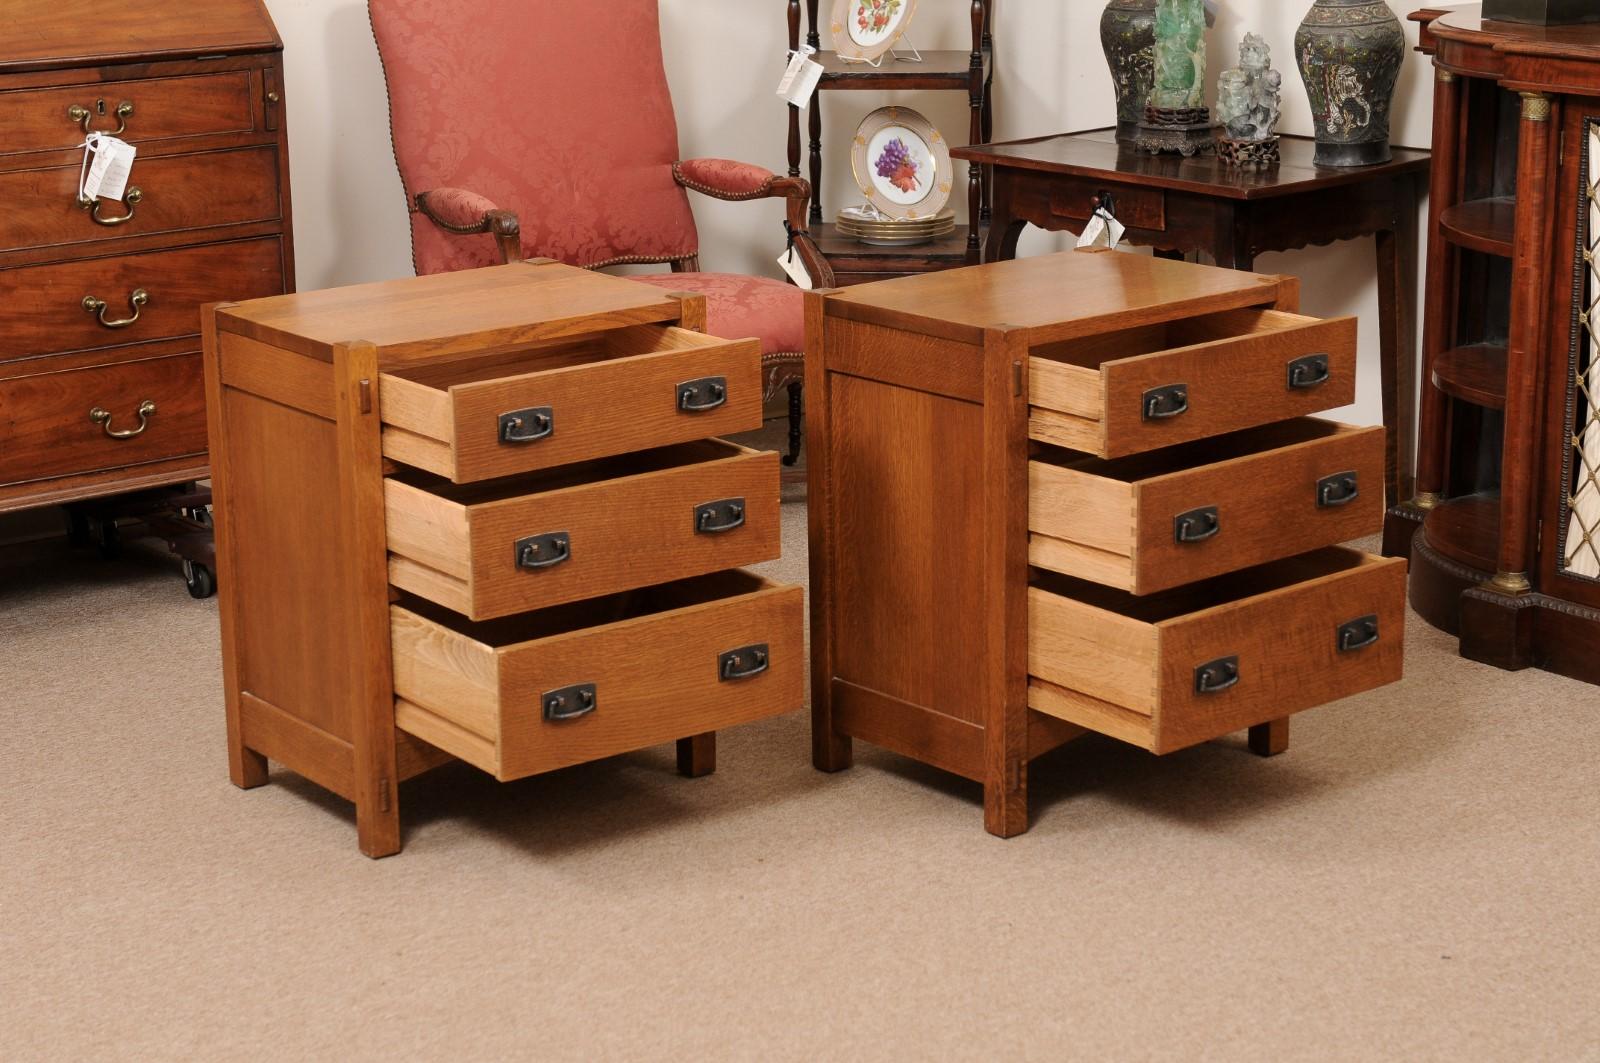 Pair of Stickley Mission Style Oak Nightstands / Side Tables with Drawers 7